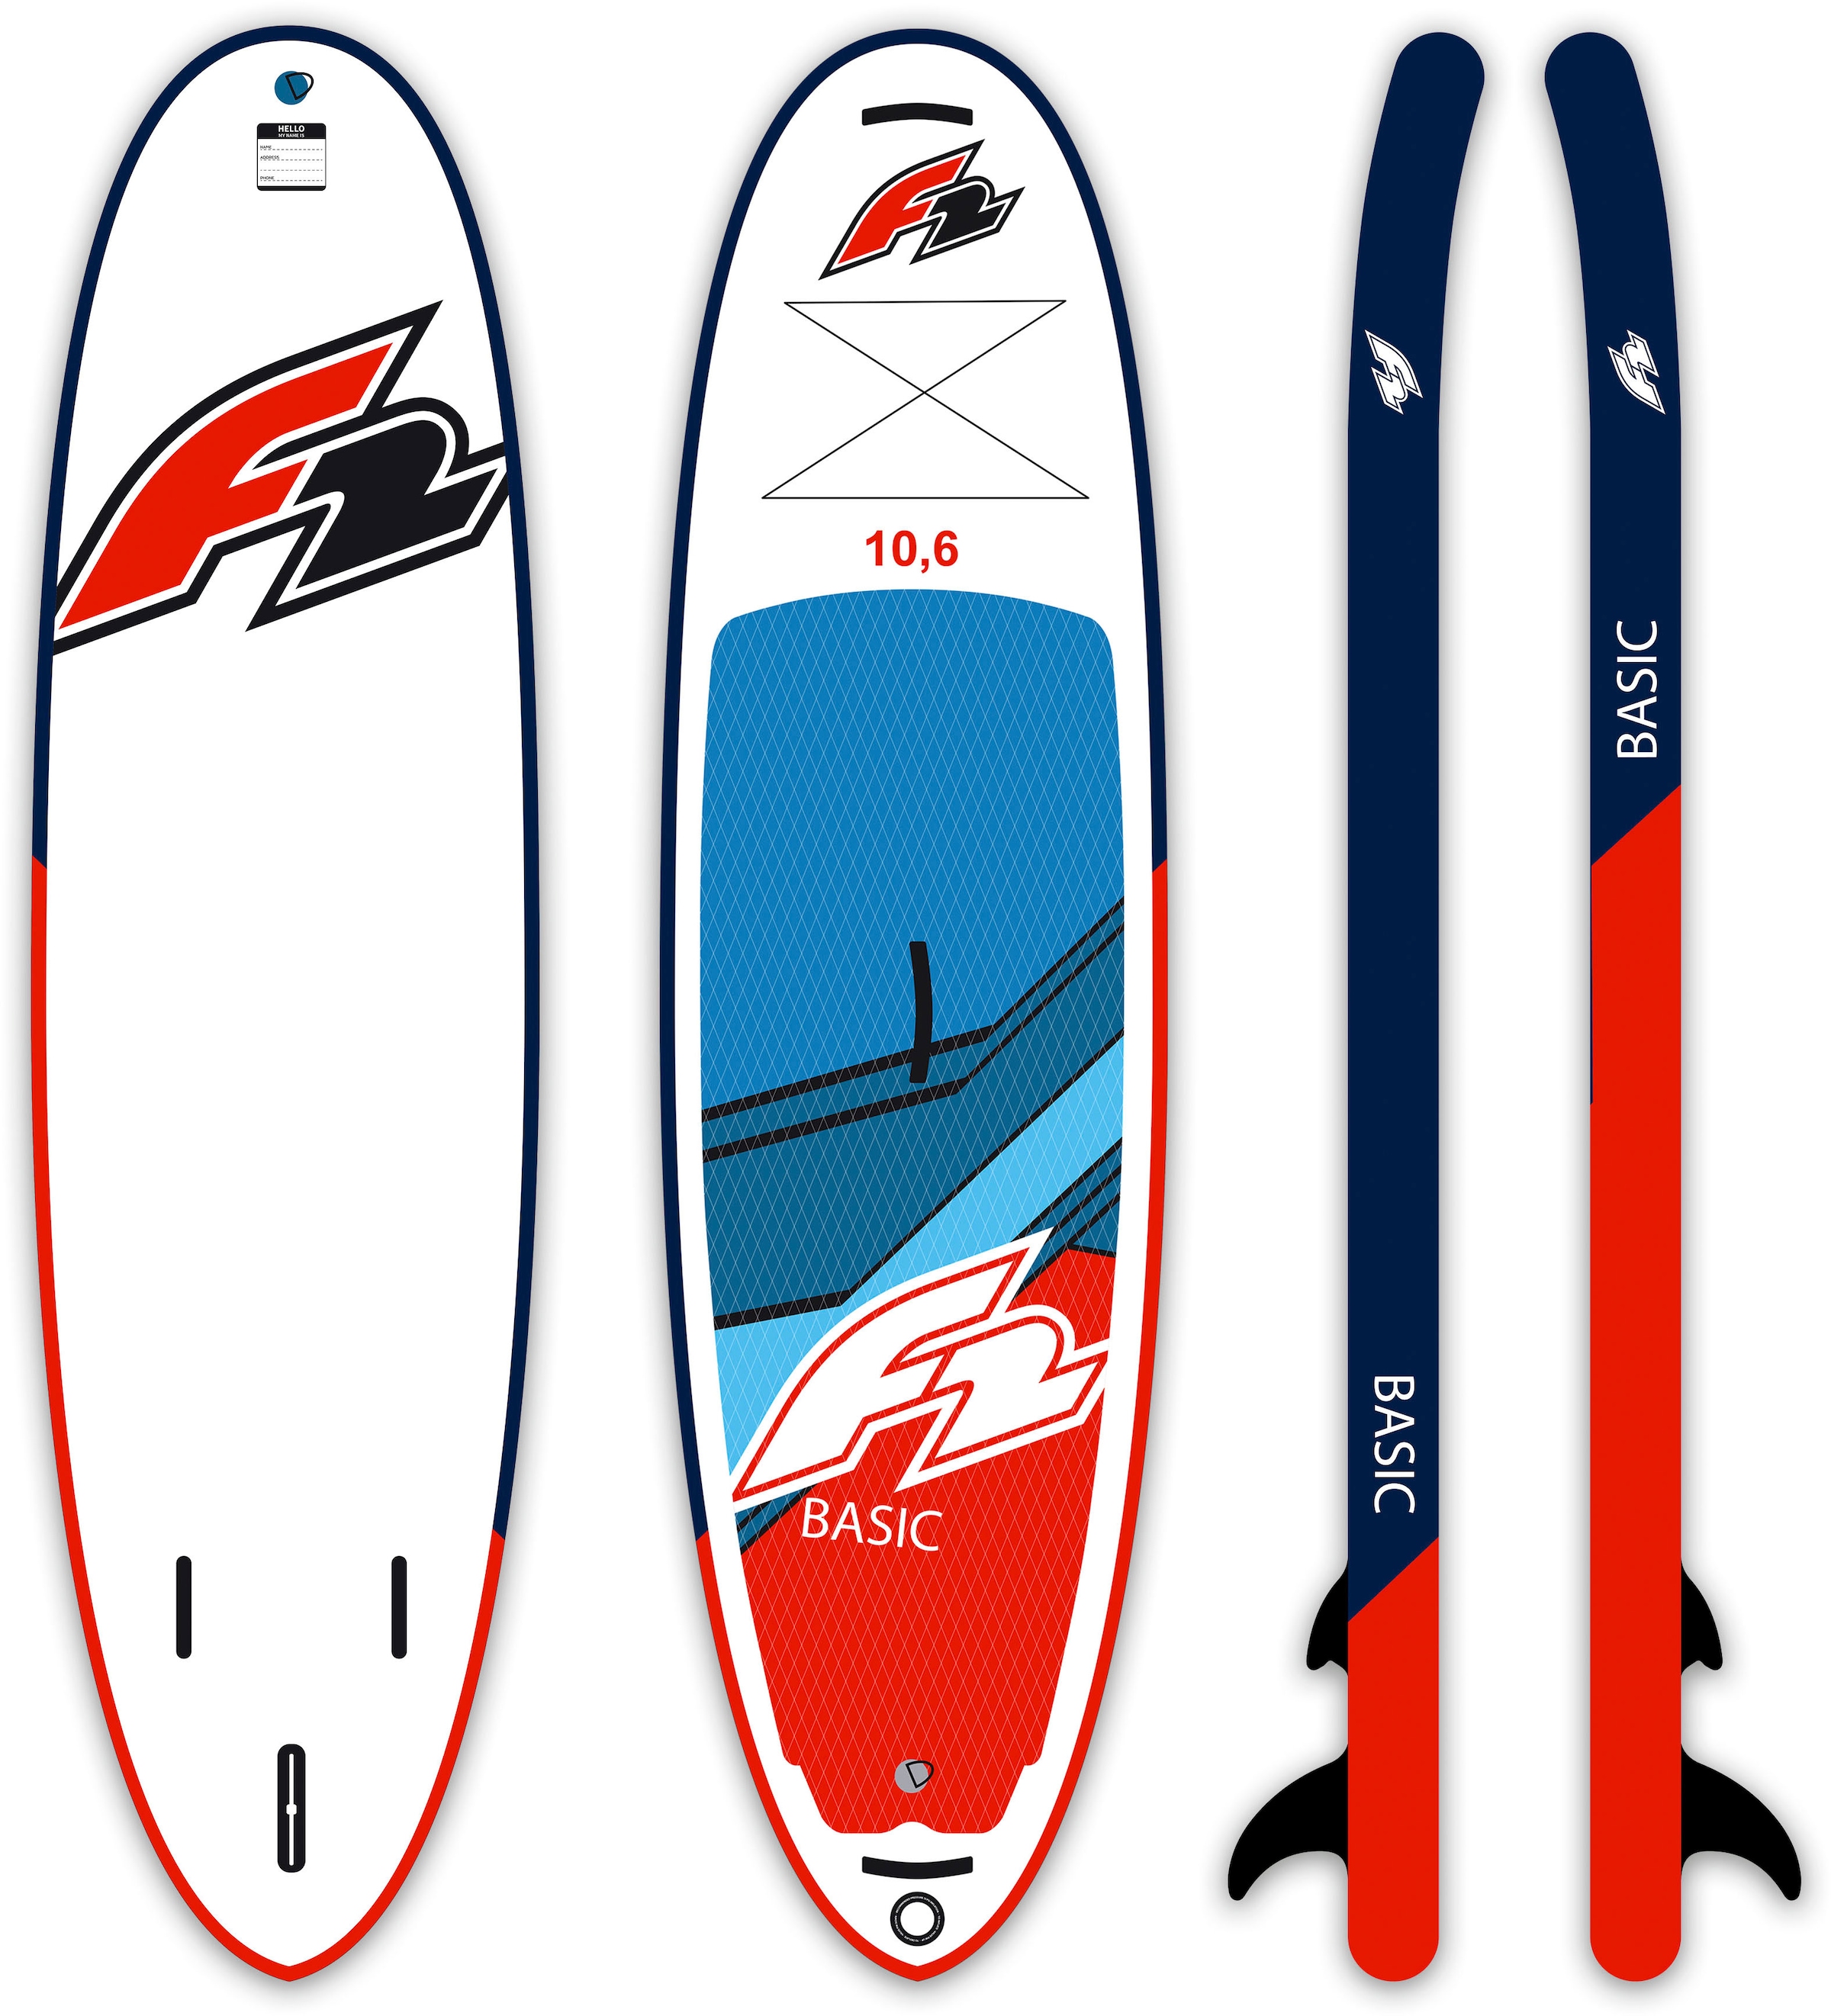 F2 F2 bei red«, Inflatable tlg., inkl. »Basic 10,6 6 SUP-Board Roundsail (Set, Rund-/Windsegel)